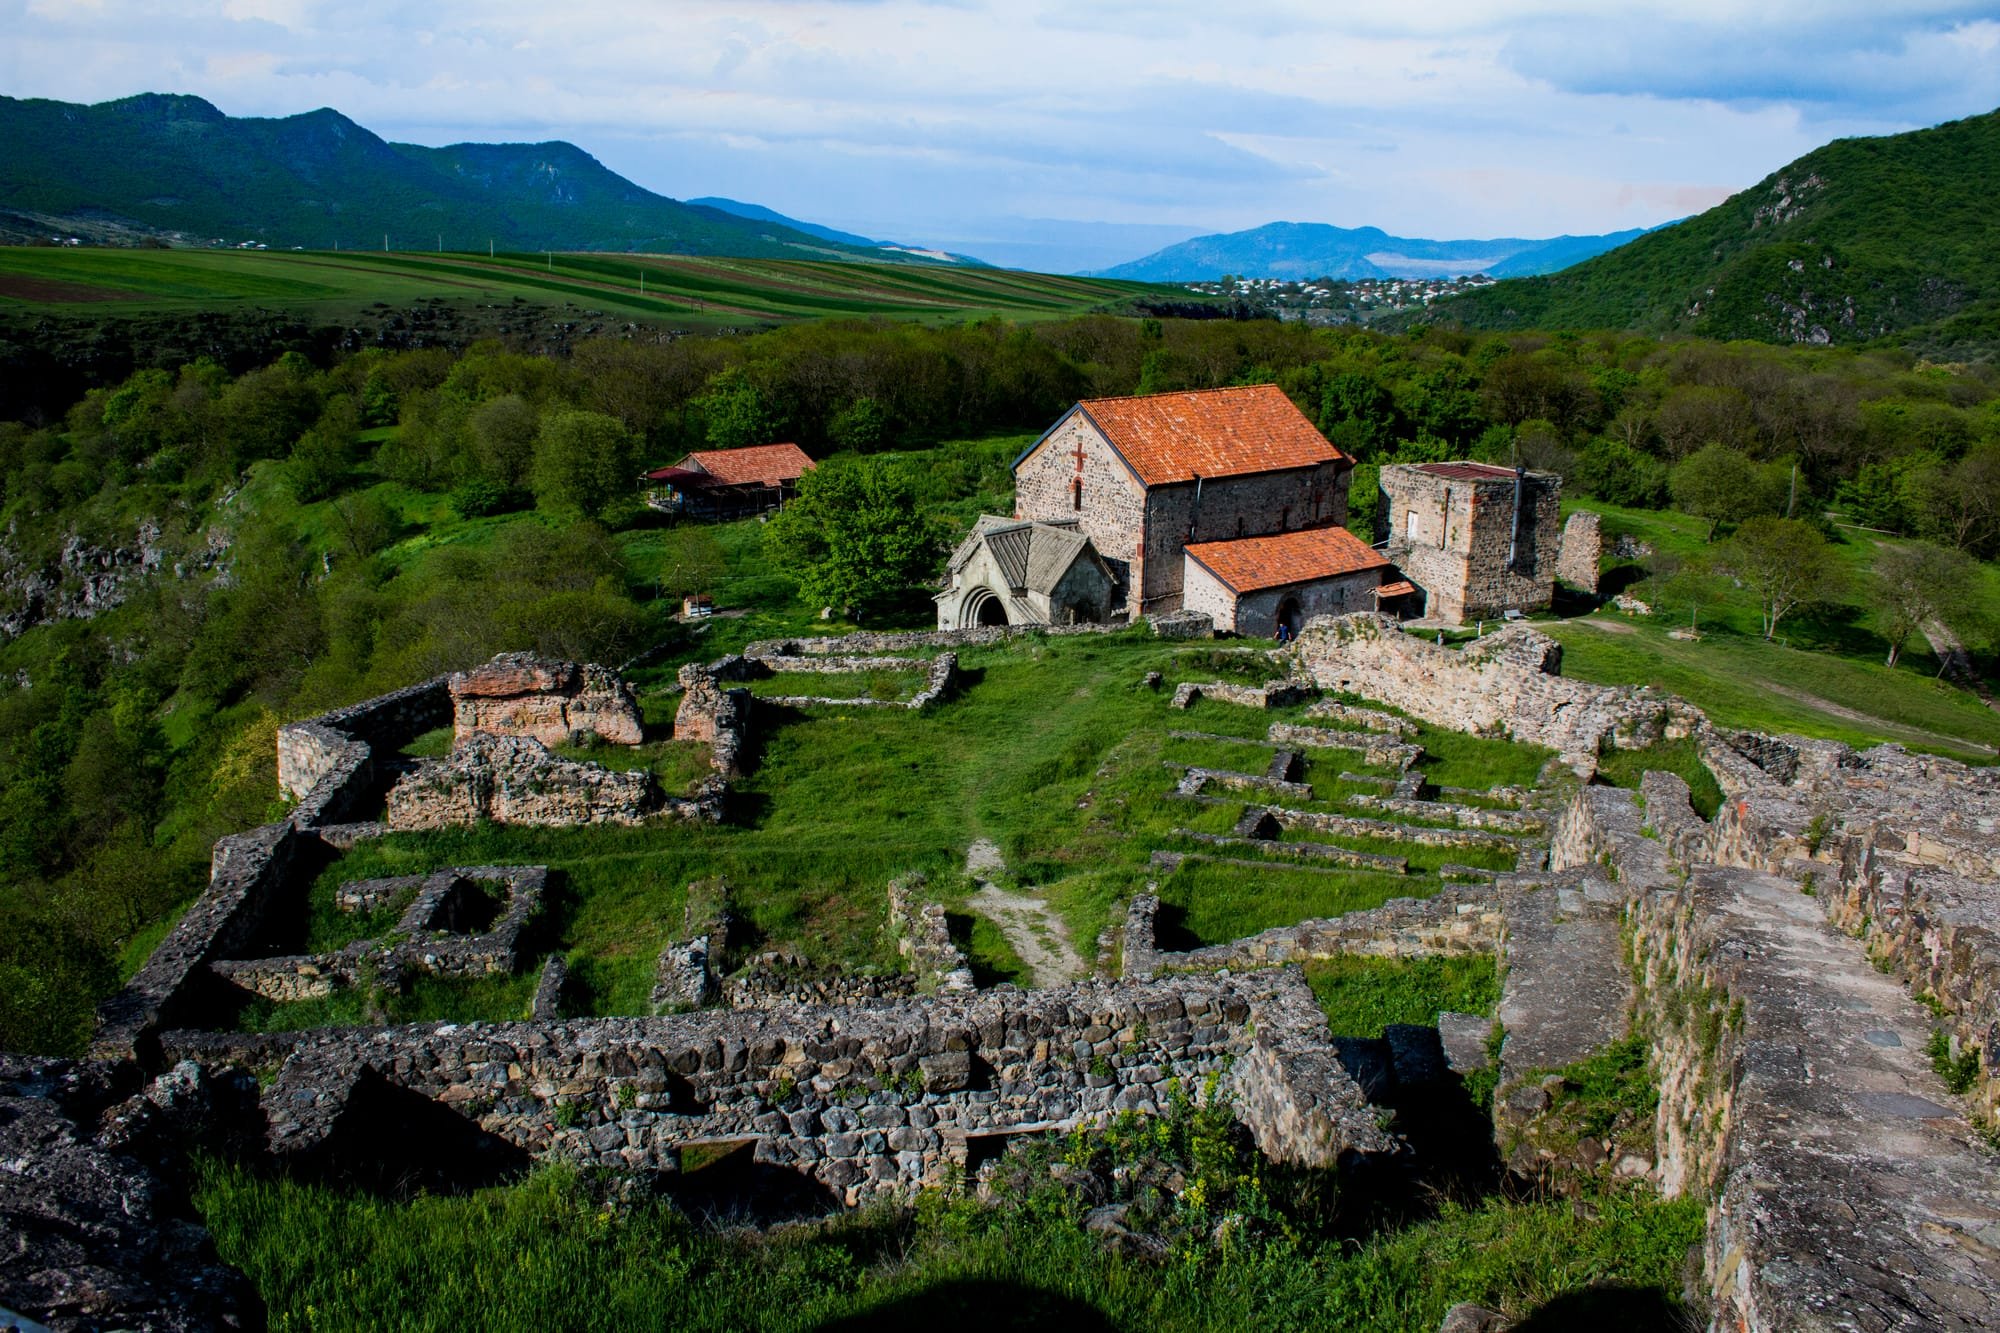 DISCOVER UNIQUE GEORGIAN INCRIPTIONS & HOMELAND OF THE FIRST EUROPEANS